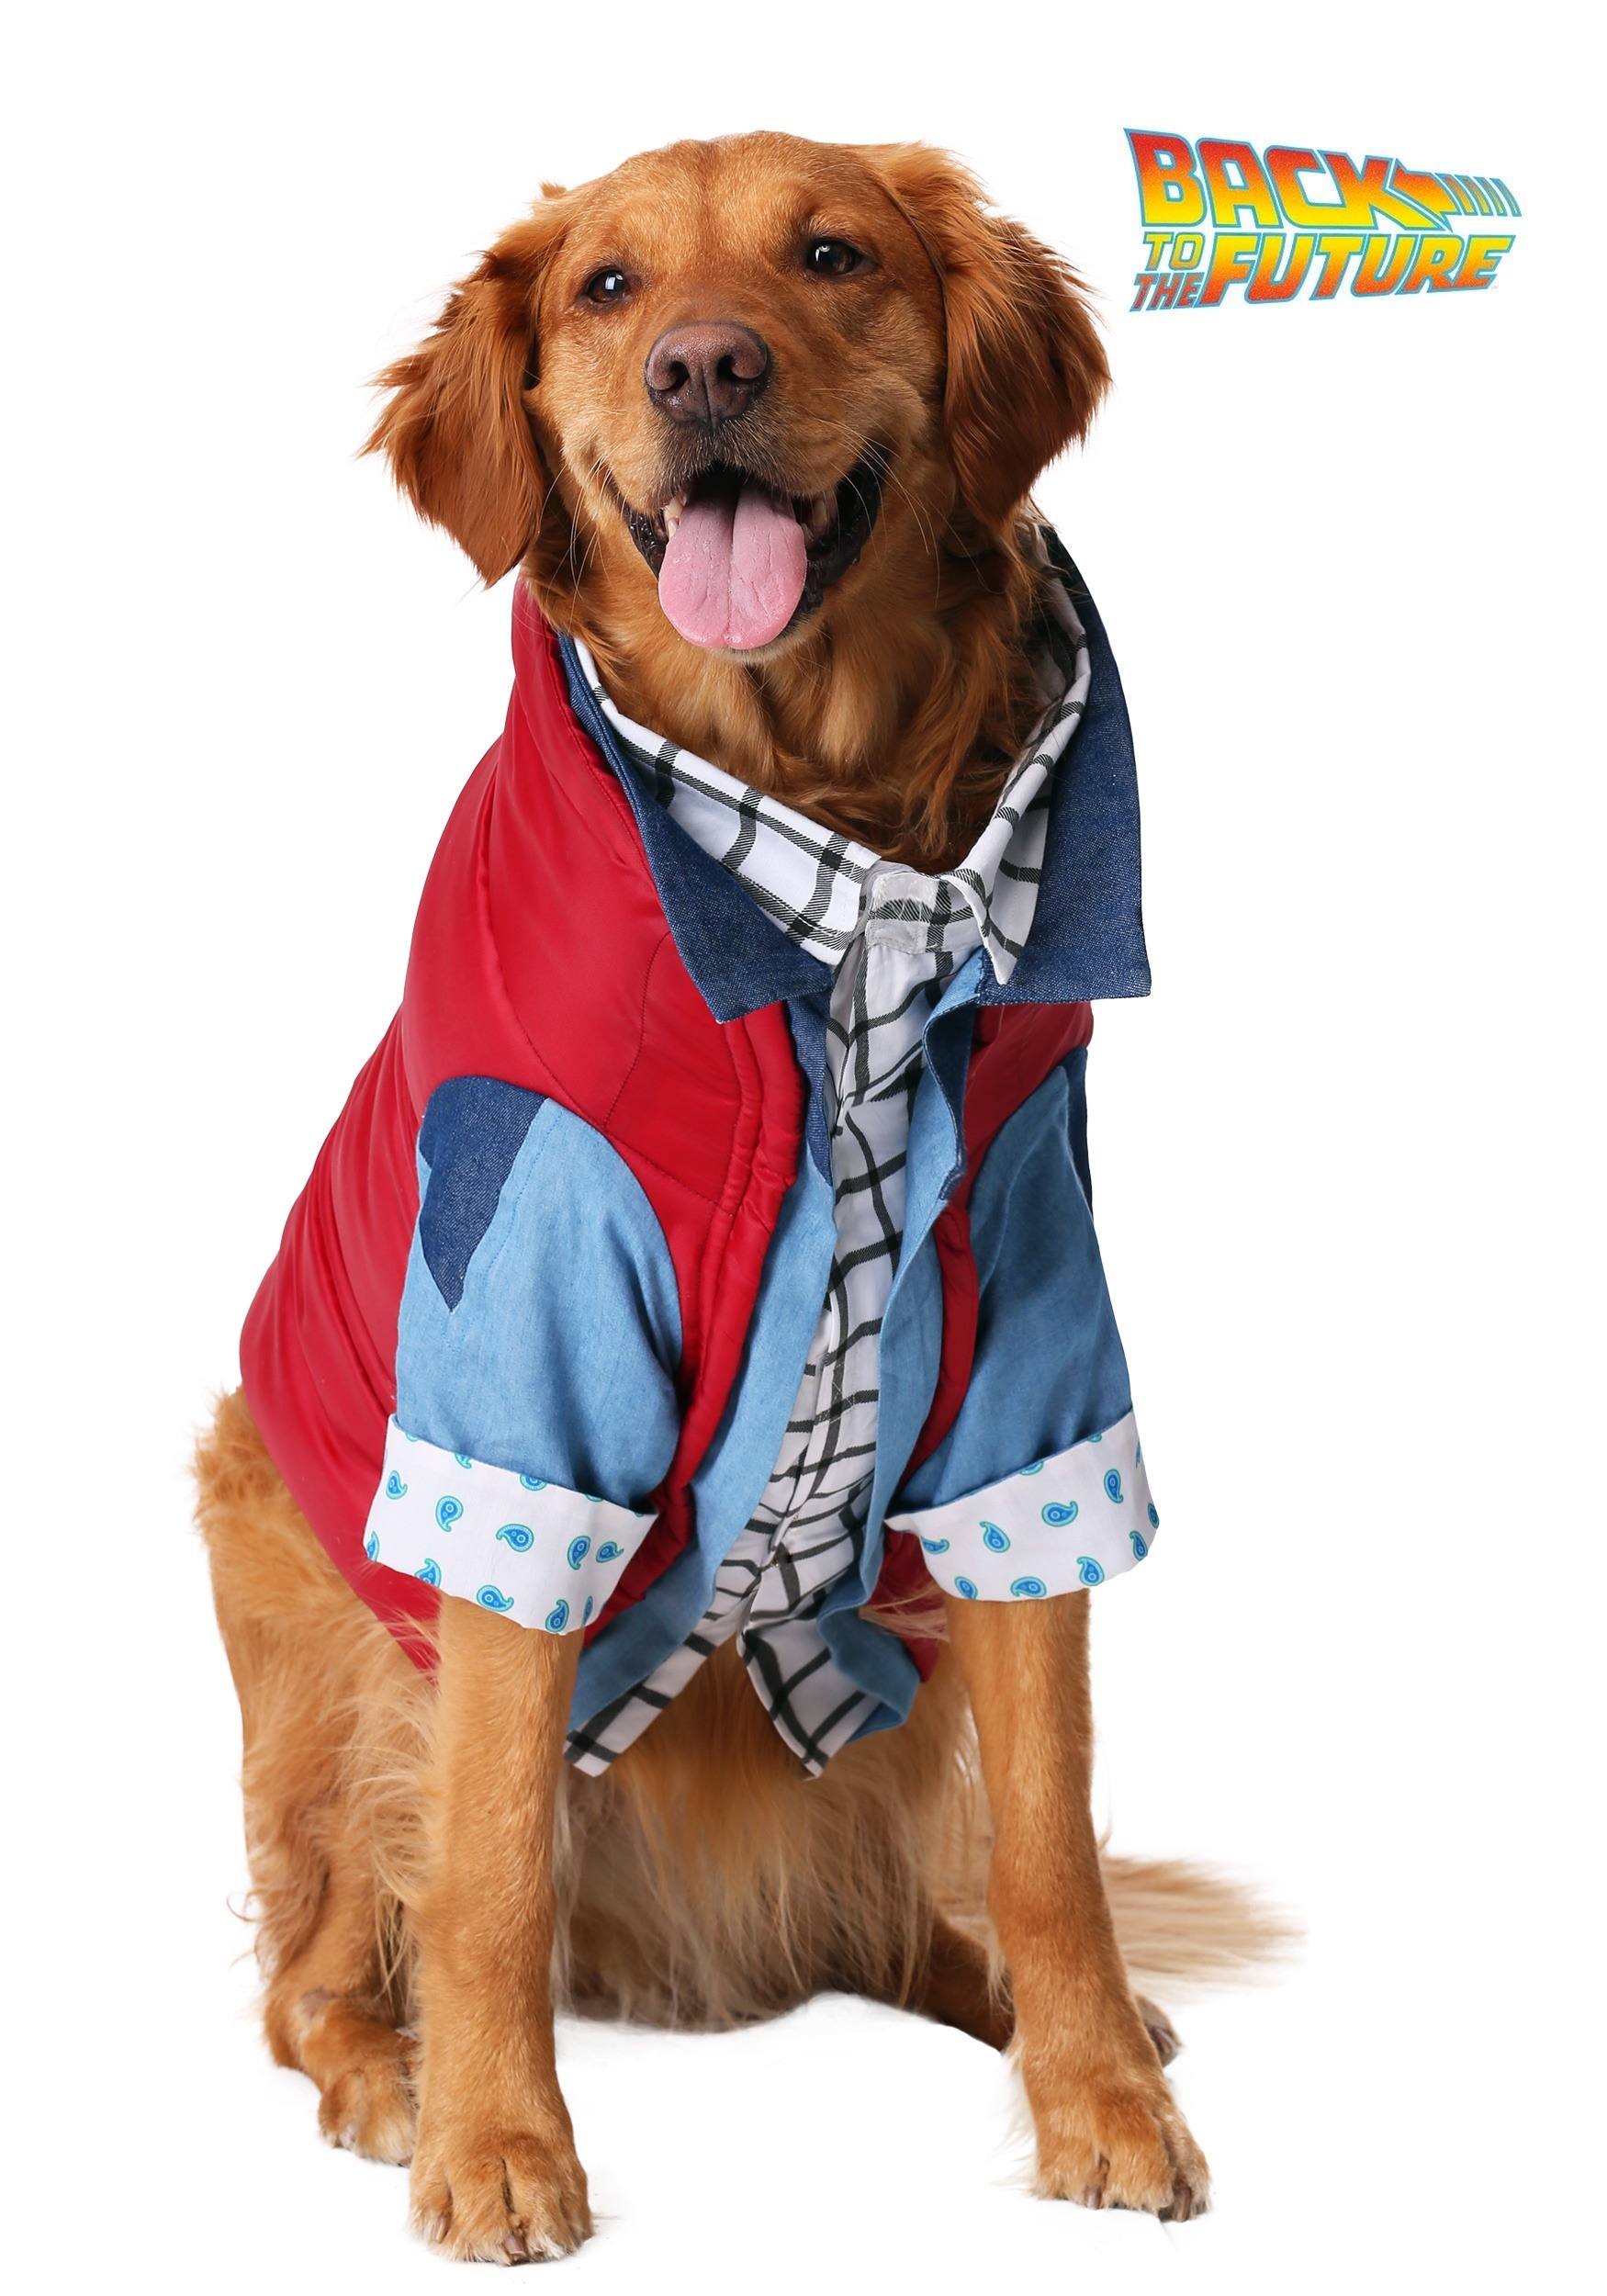 Marty McFly Dog Costume Back to the Future